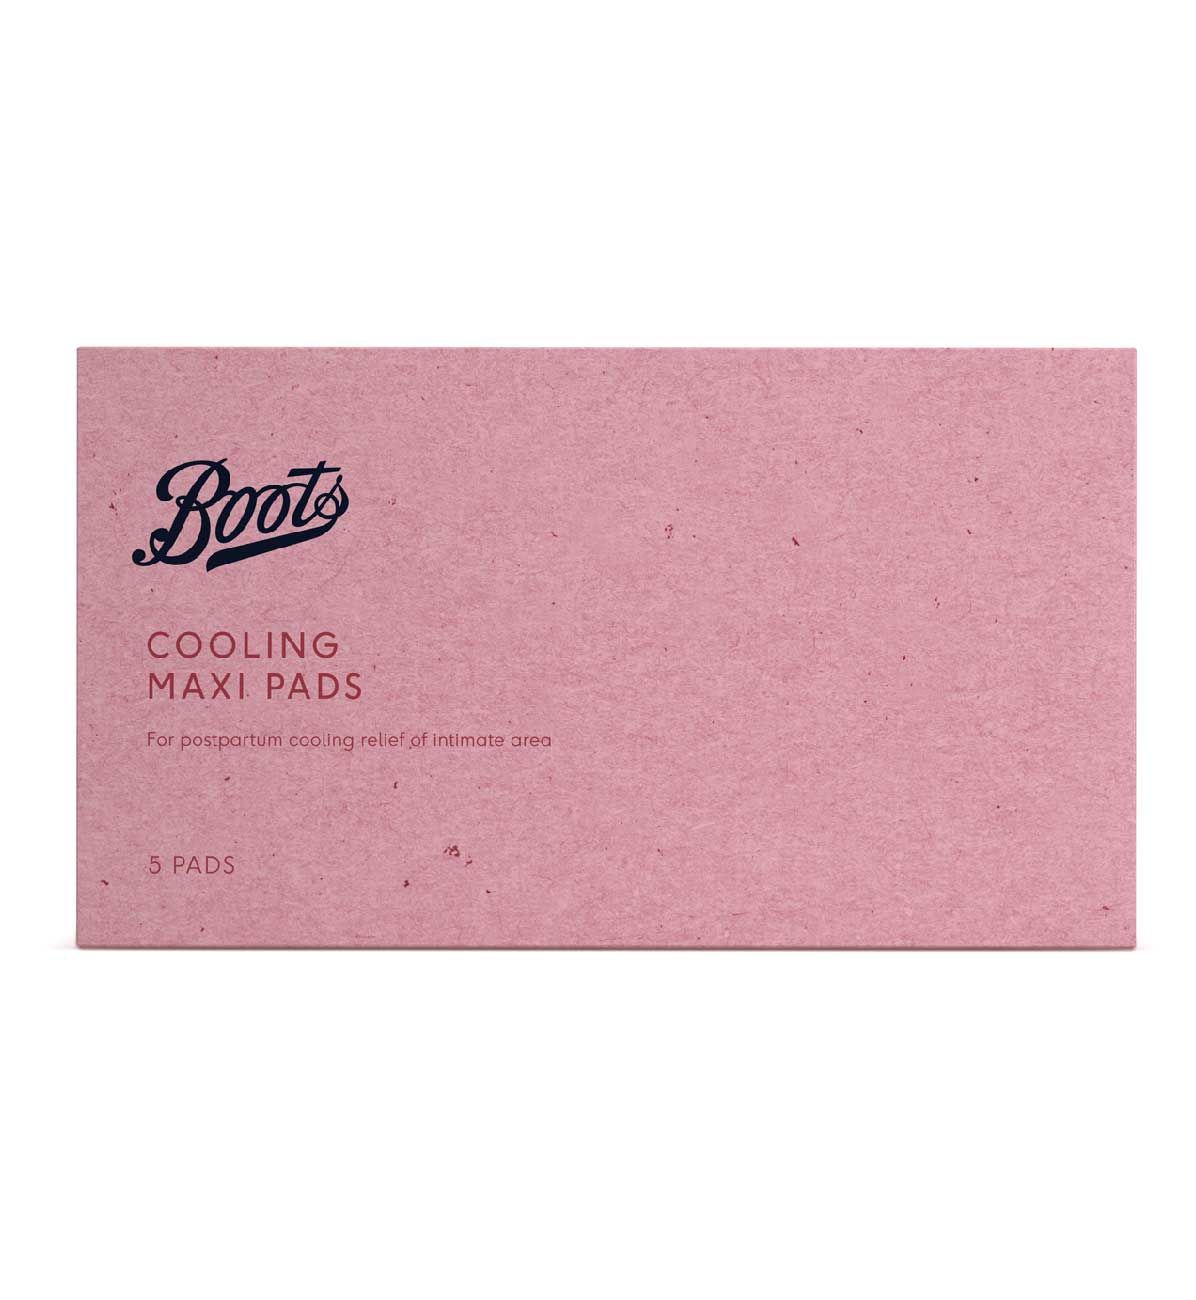 Boots Cooling Maxi Pads 5s